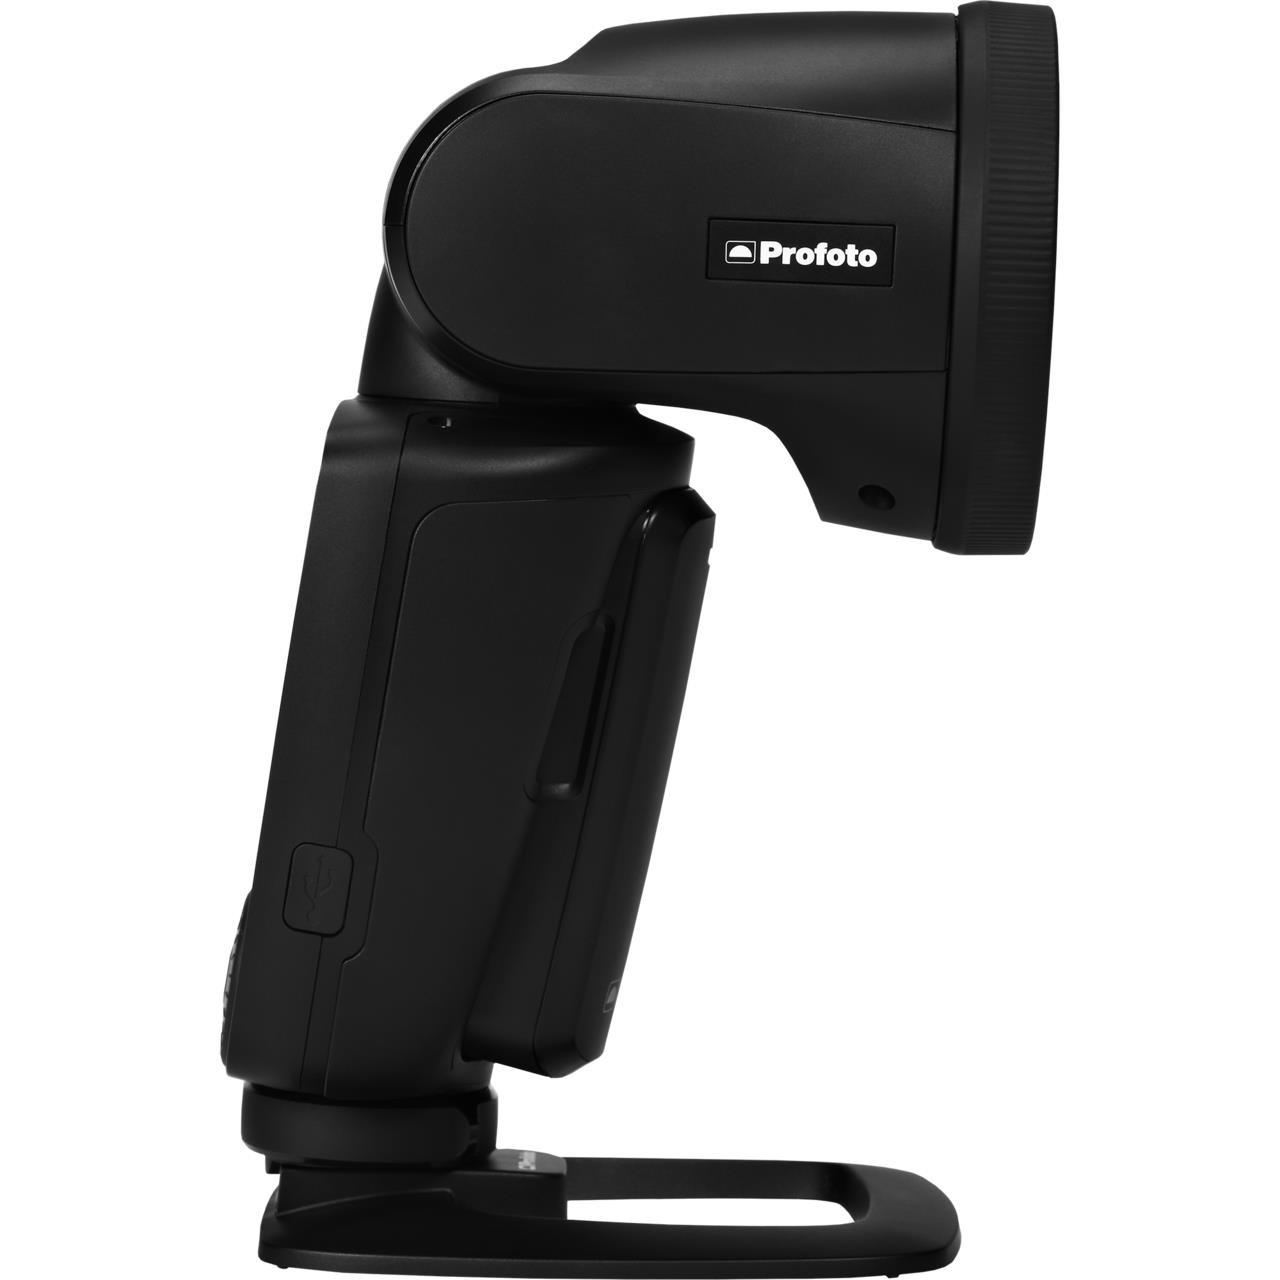 Profoto A1X AirTTL-S Studio Light for Sony, 901206